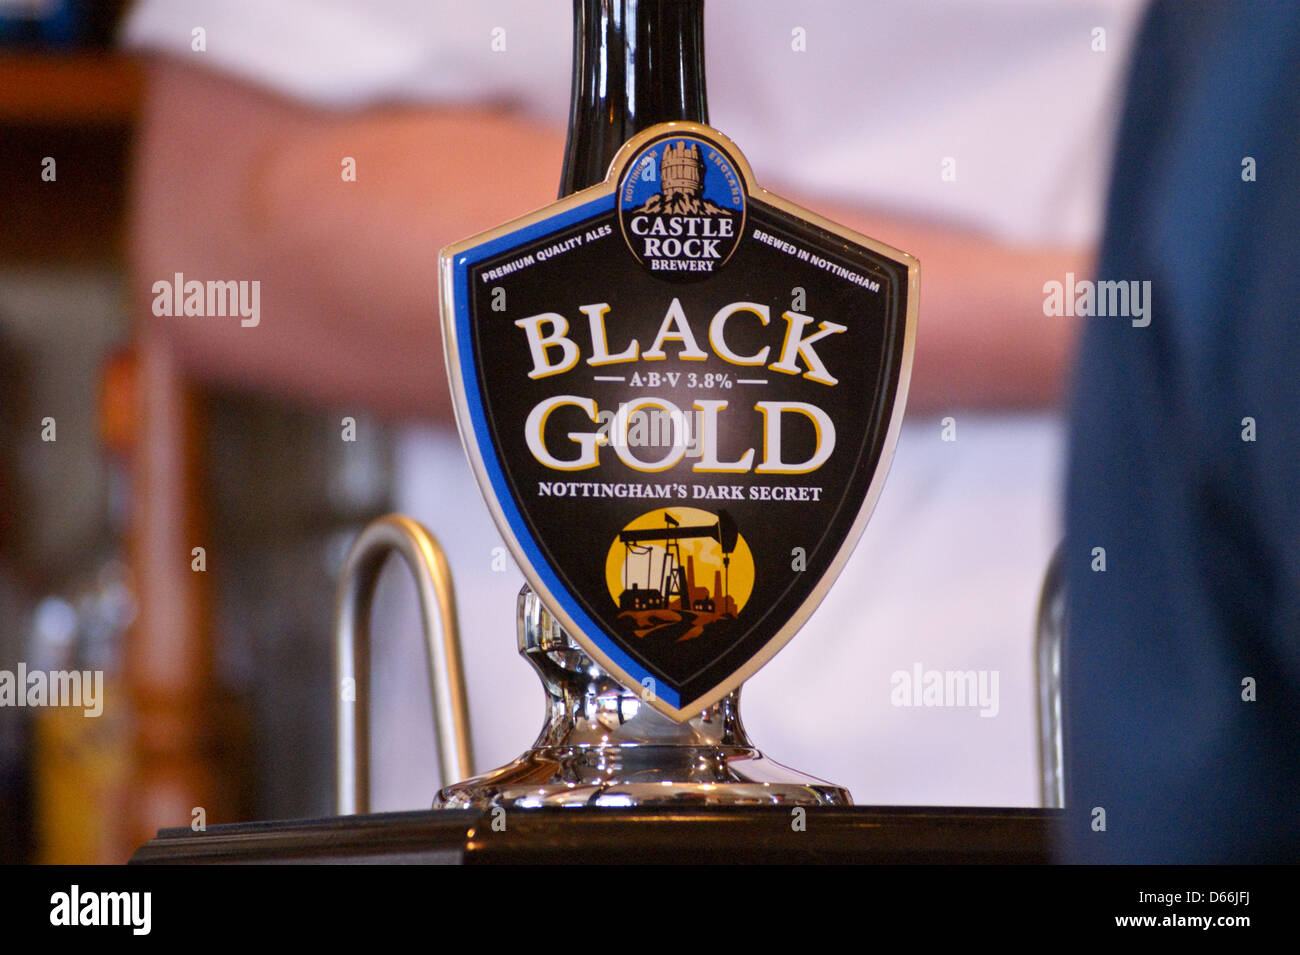 A pump clip of 'Black Gold' dark mild ale  beer from Castle Rock brewery, Nottingham Stock Photo